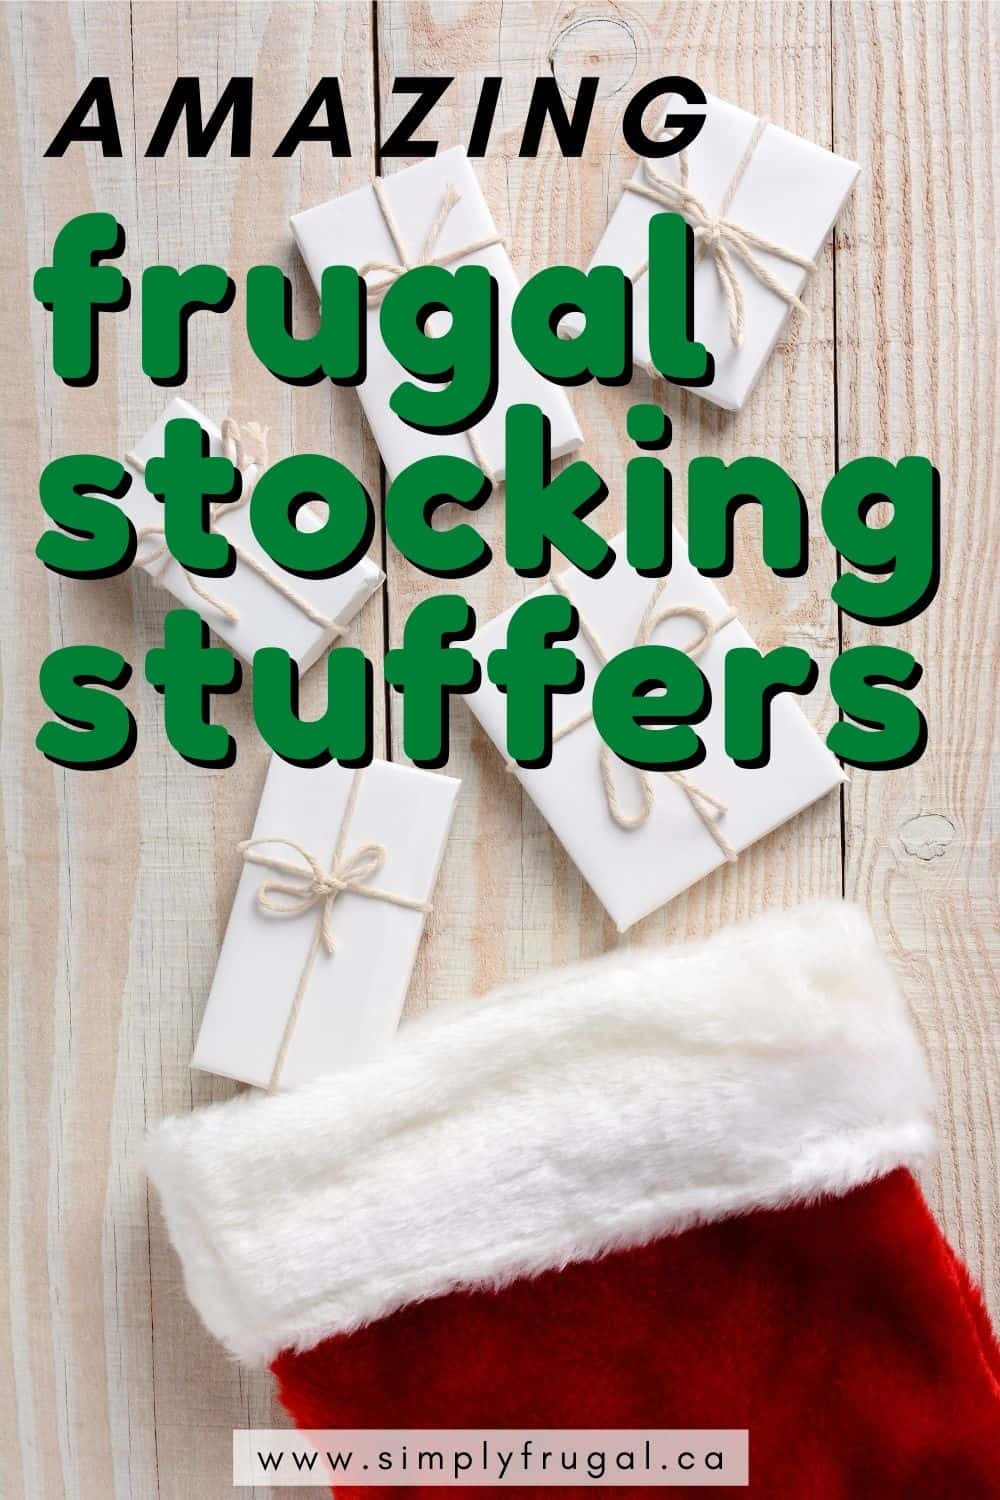 Find 40+ fun and frugal stocking stuffers! You are sure to find budget friendly stocking stuffer ideas for the whole family!